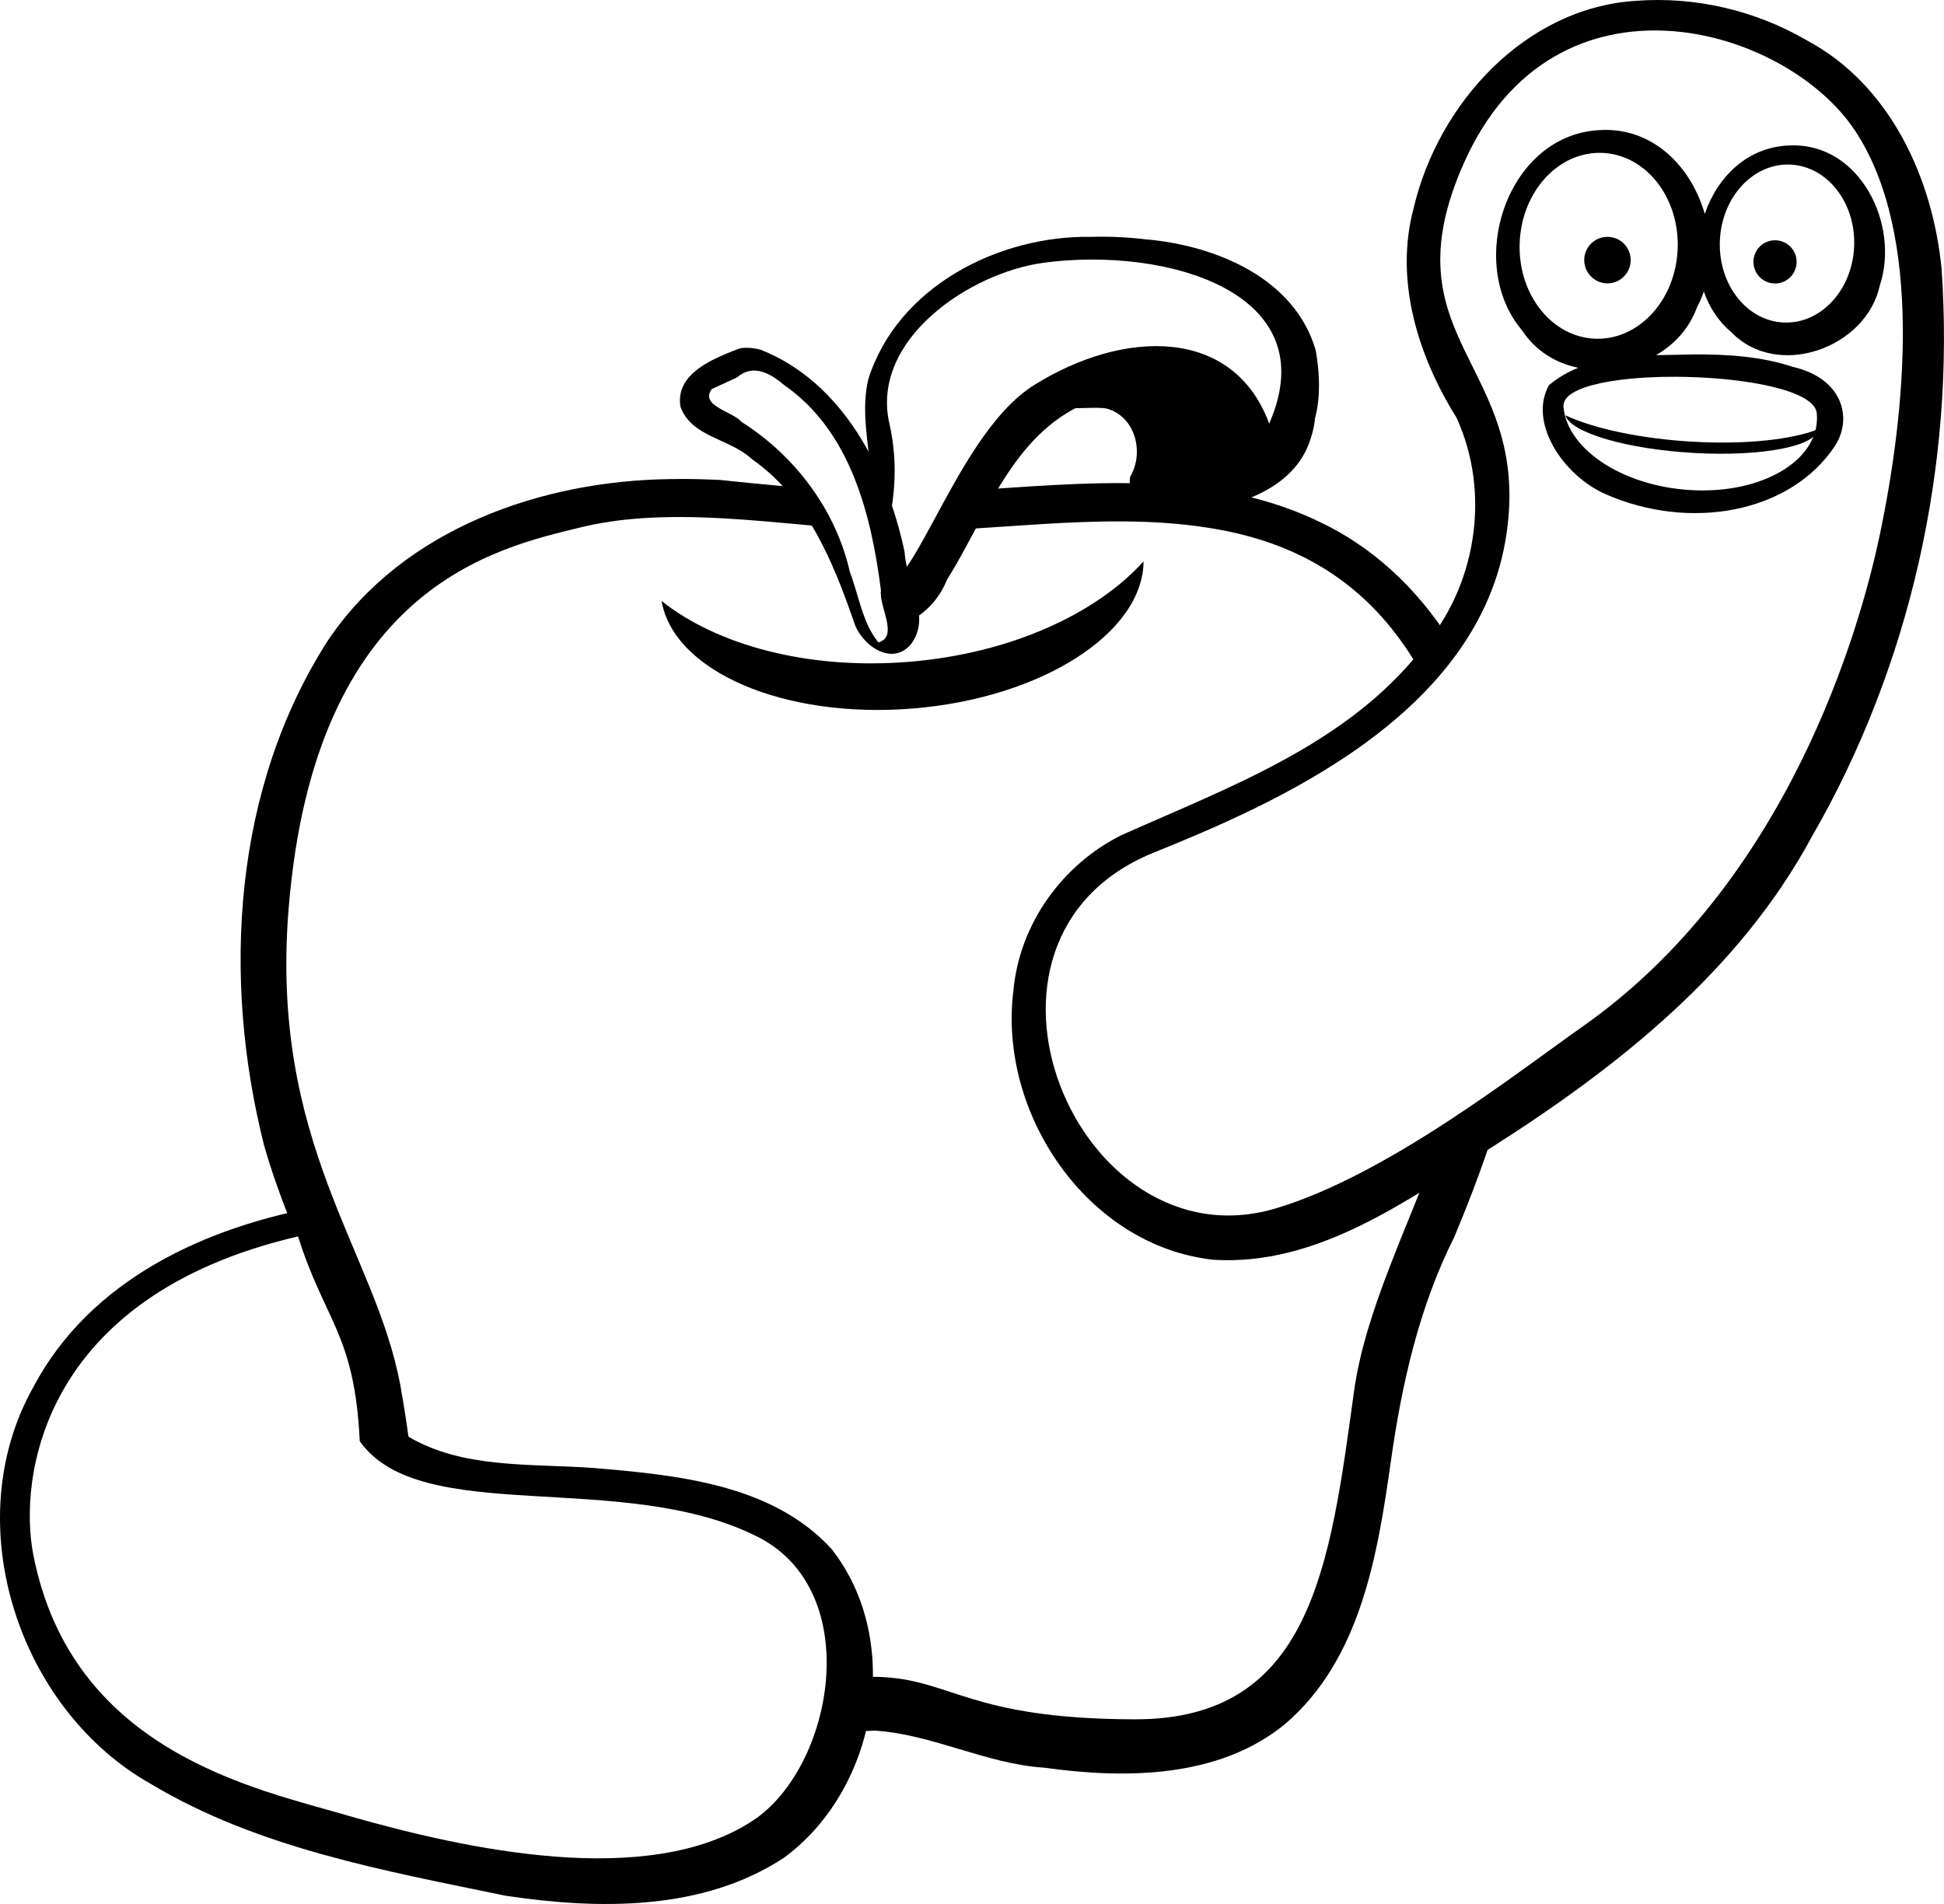 Worm clipart w be for. Aj apple bclipart